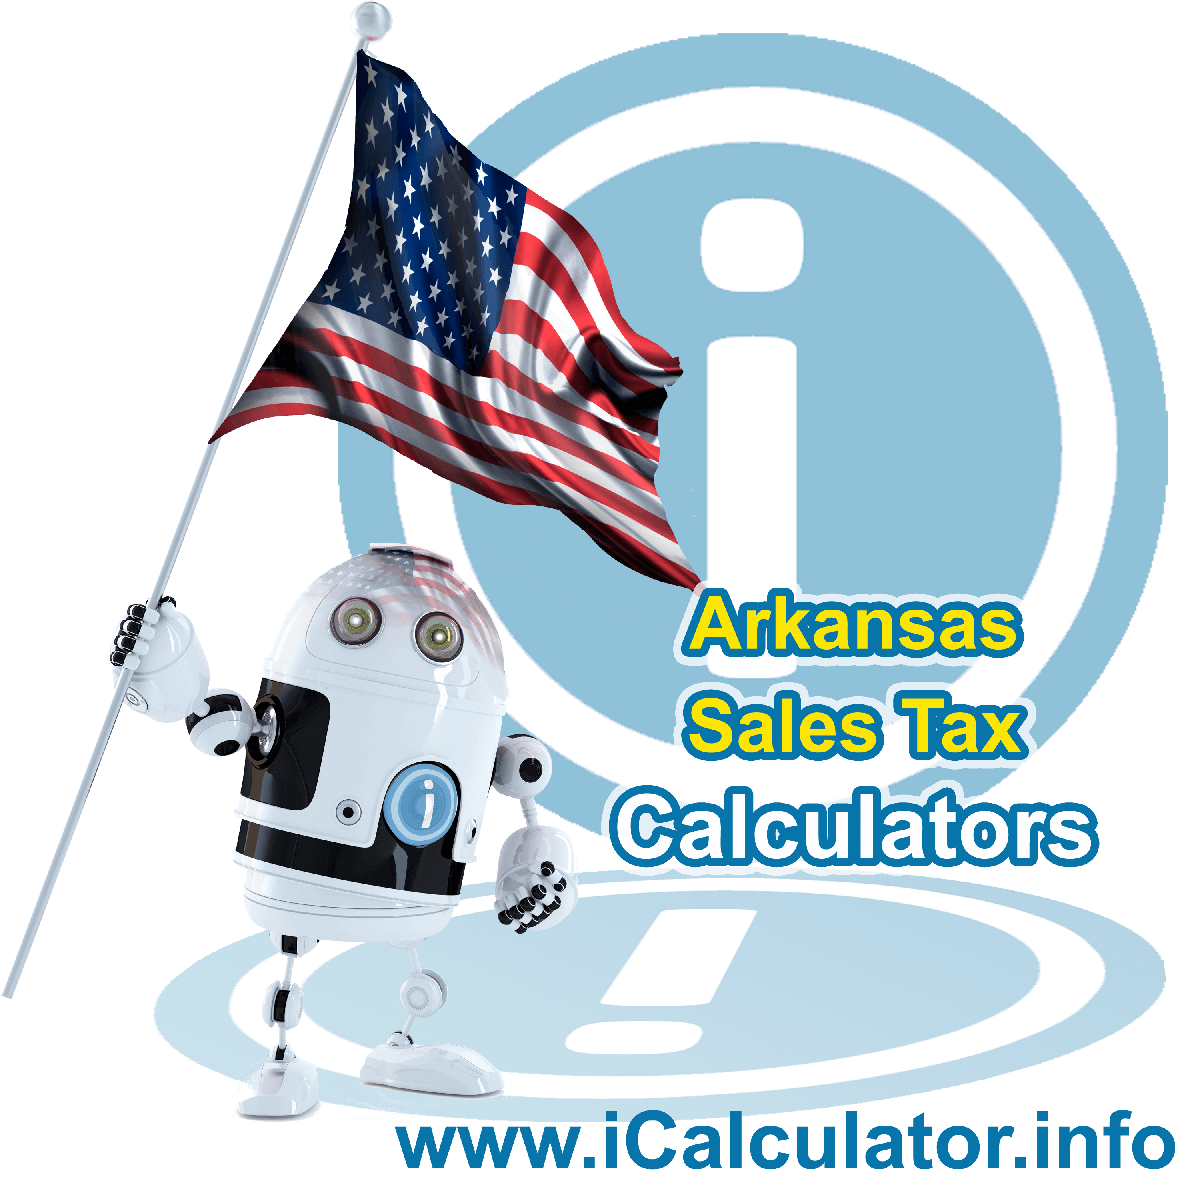 Lawrence County Sales Rates: This image illustrates a calculator robot calculating Lawrence County sales tax manually using the Lawrence County Sales Tax Formula. You can use this information to calculate Lawrence County Sales Tax manually or use the Lawrence County Sales Tax Calculator to calculate sales tax online.